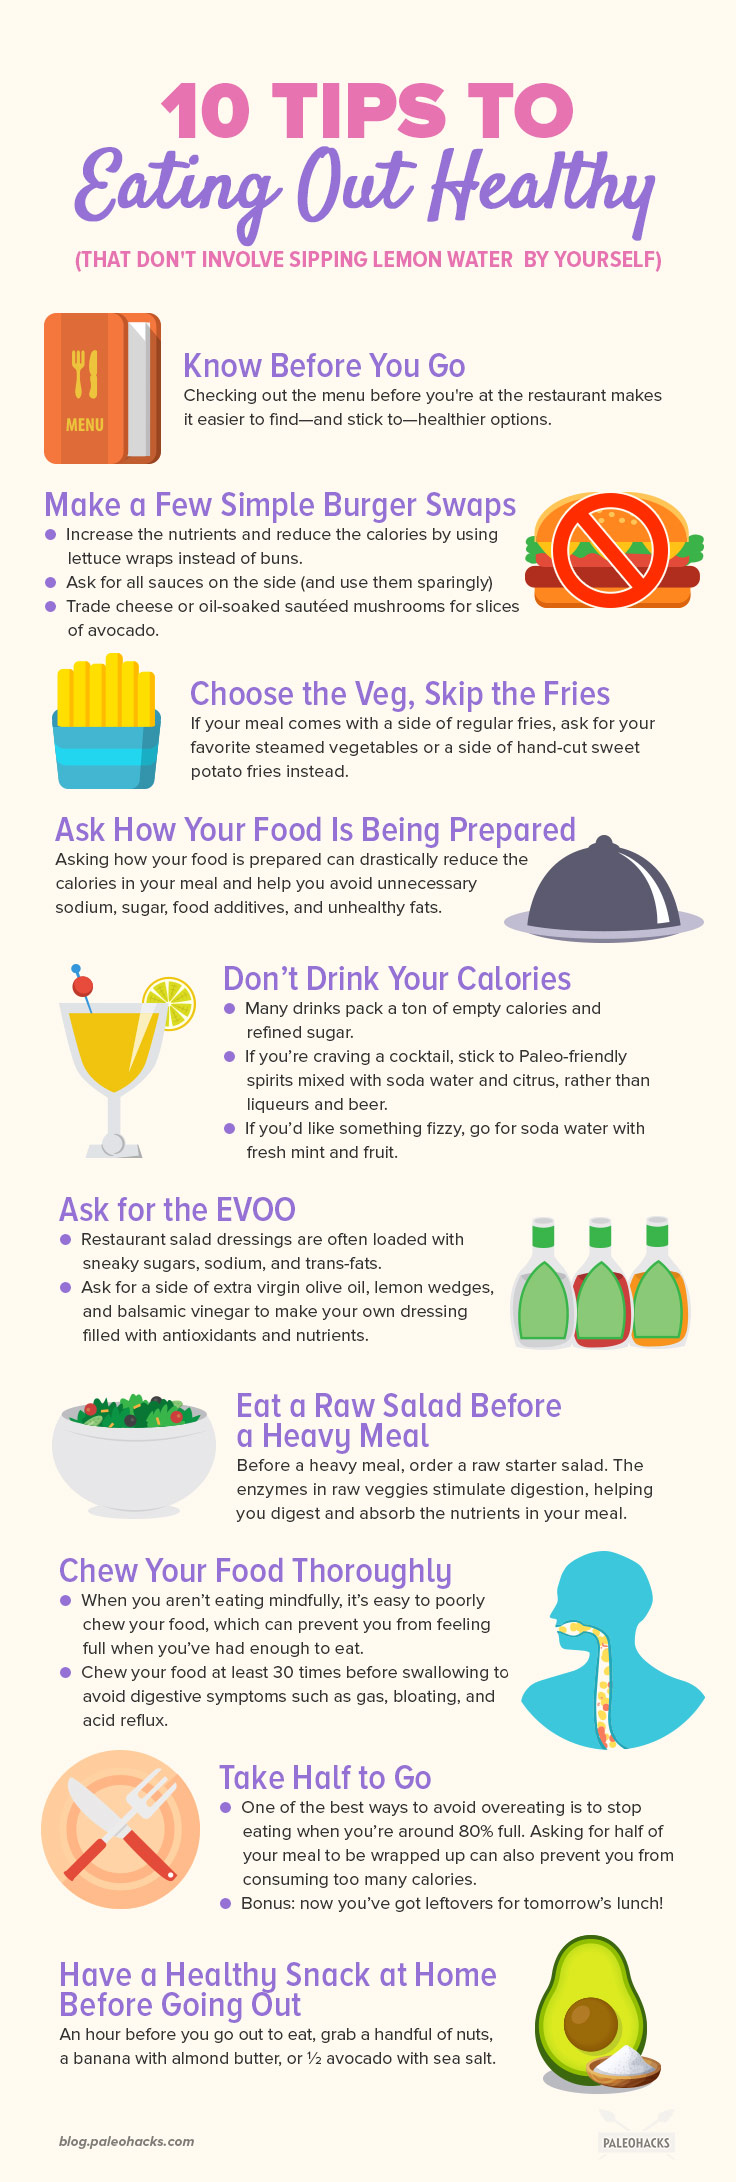 Sure it’s trickier to stay healthy at restaurants. Stick to these easy tips so you can enjoy dining out while sticking to your health goals.